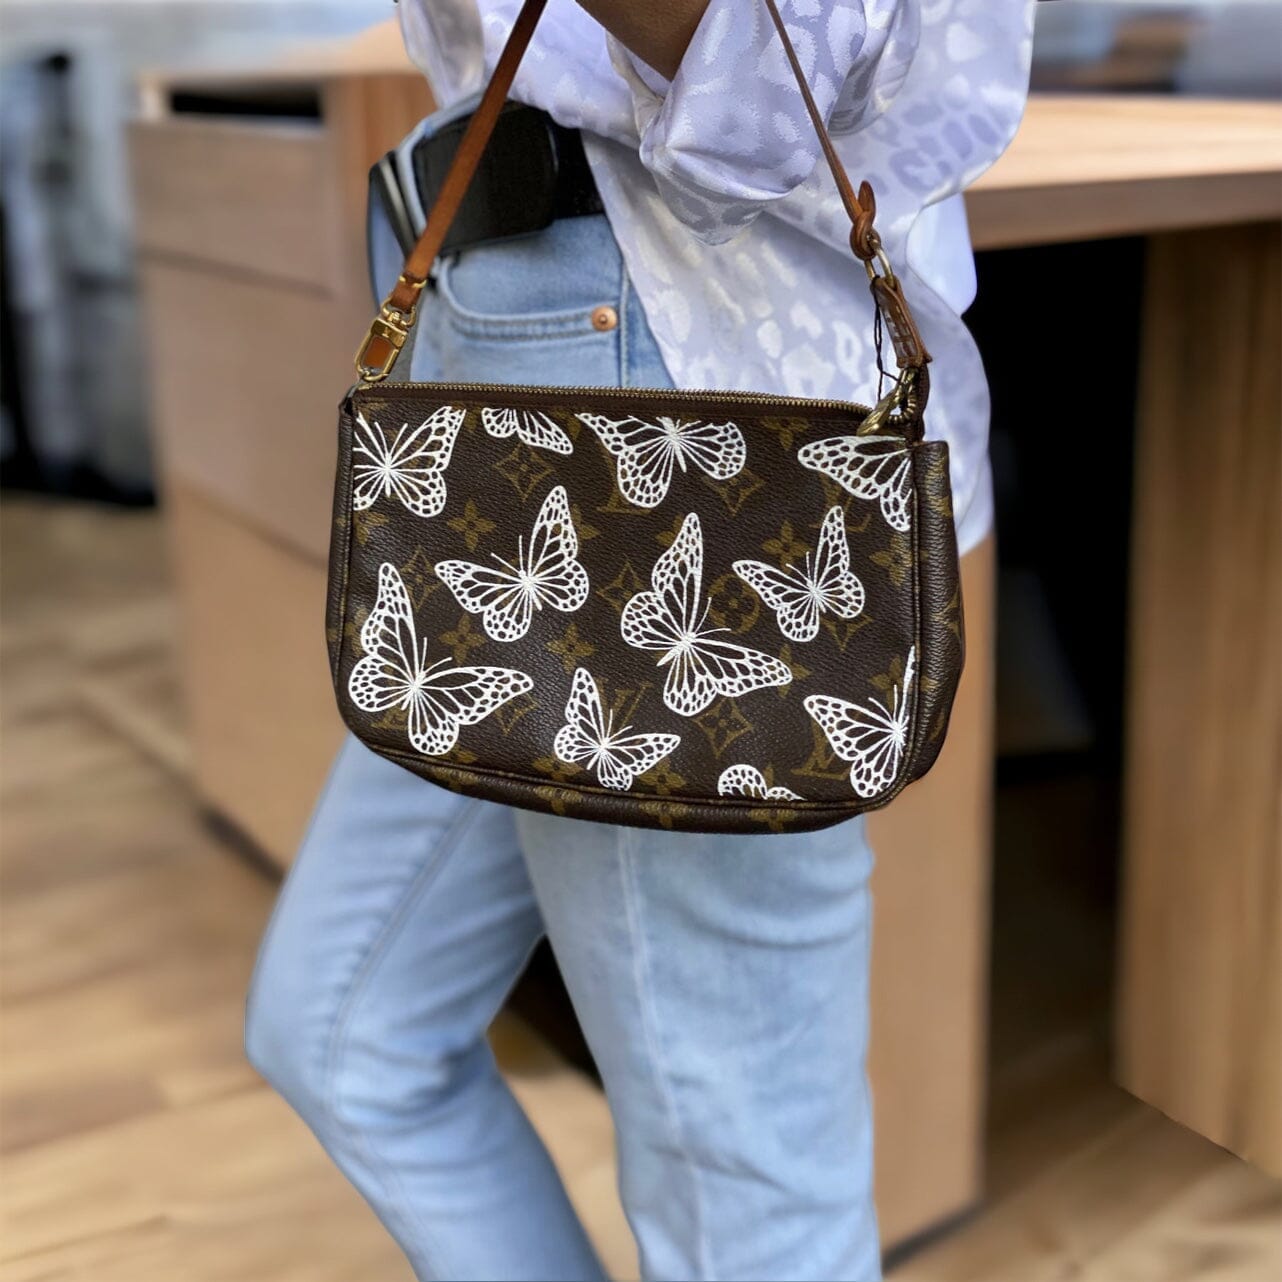 lv paint can purse